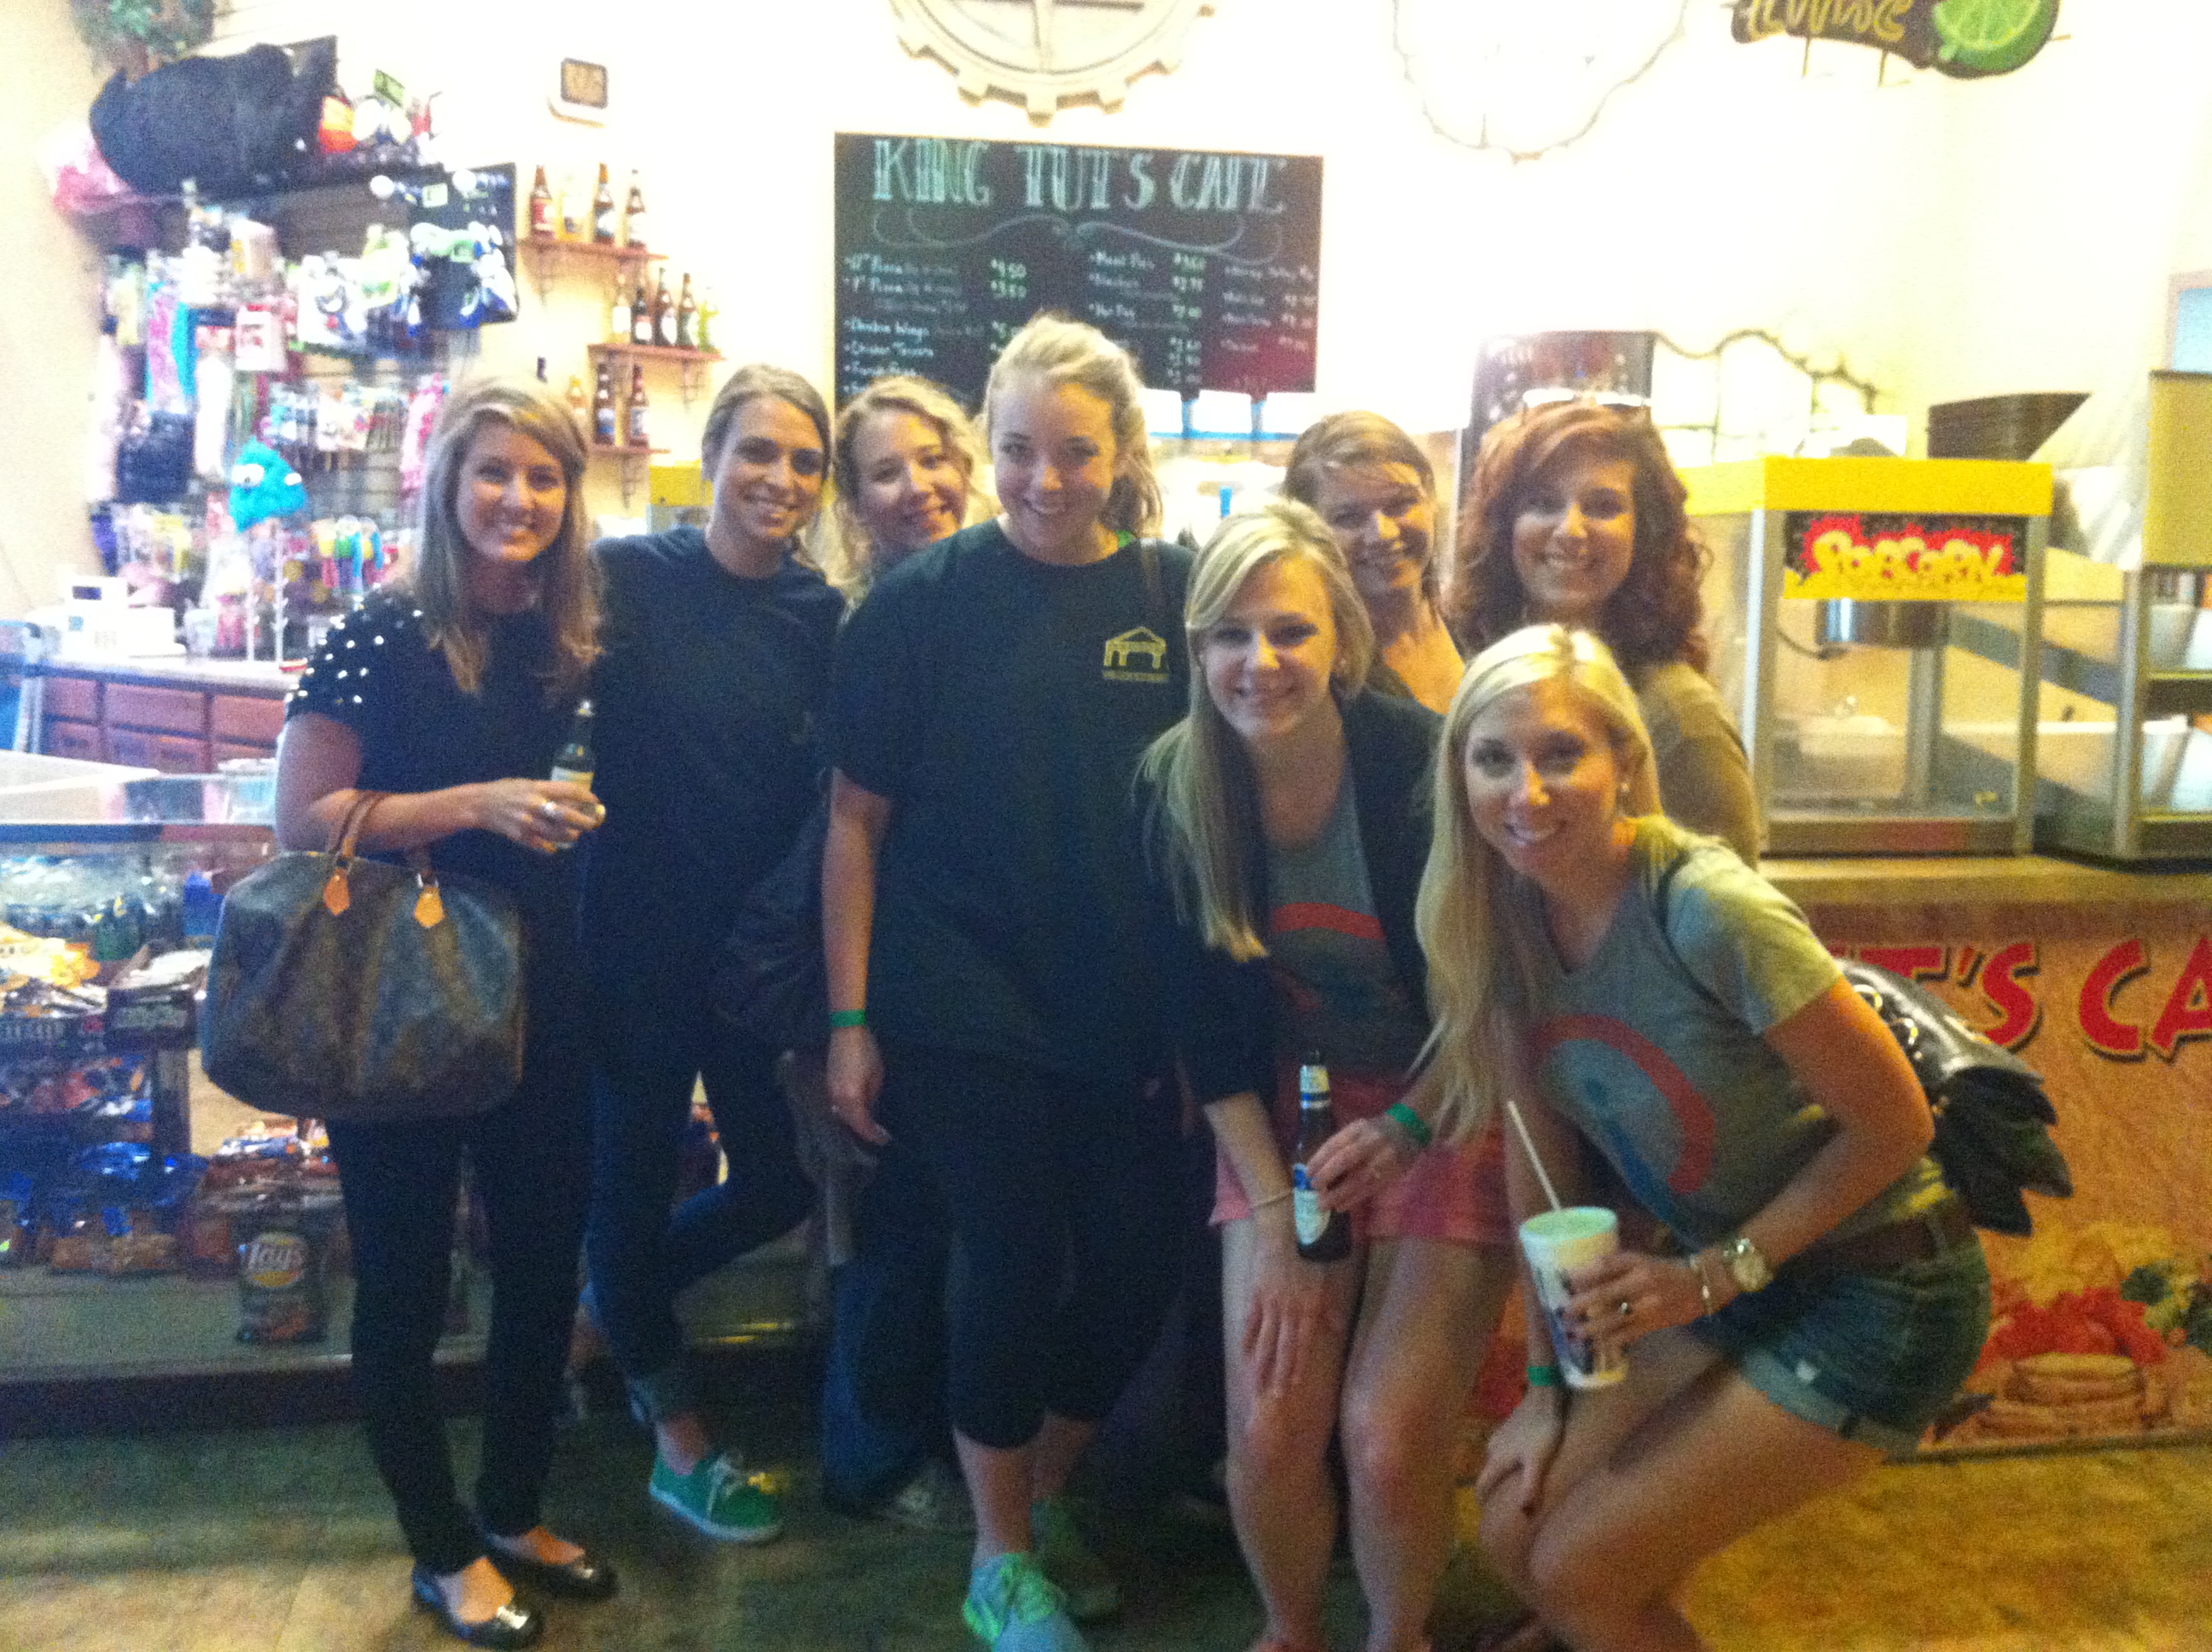 Some of our wonderful account managers: (L to R) Jordan, Maggie, Rebekah, Laura, Alison, Jeanne, Sarah, and Gabrielle.